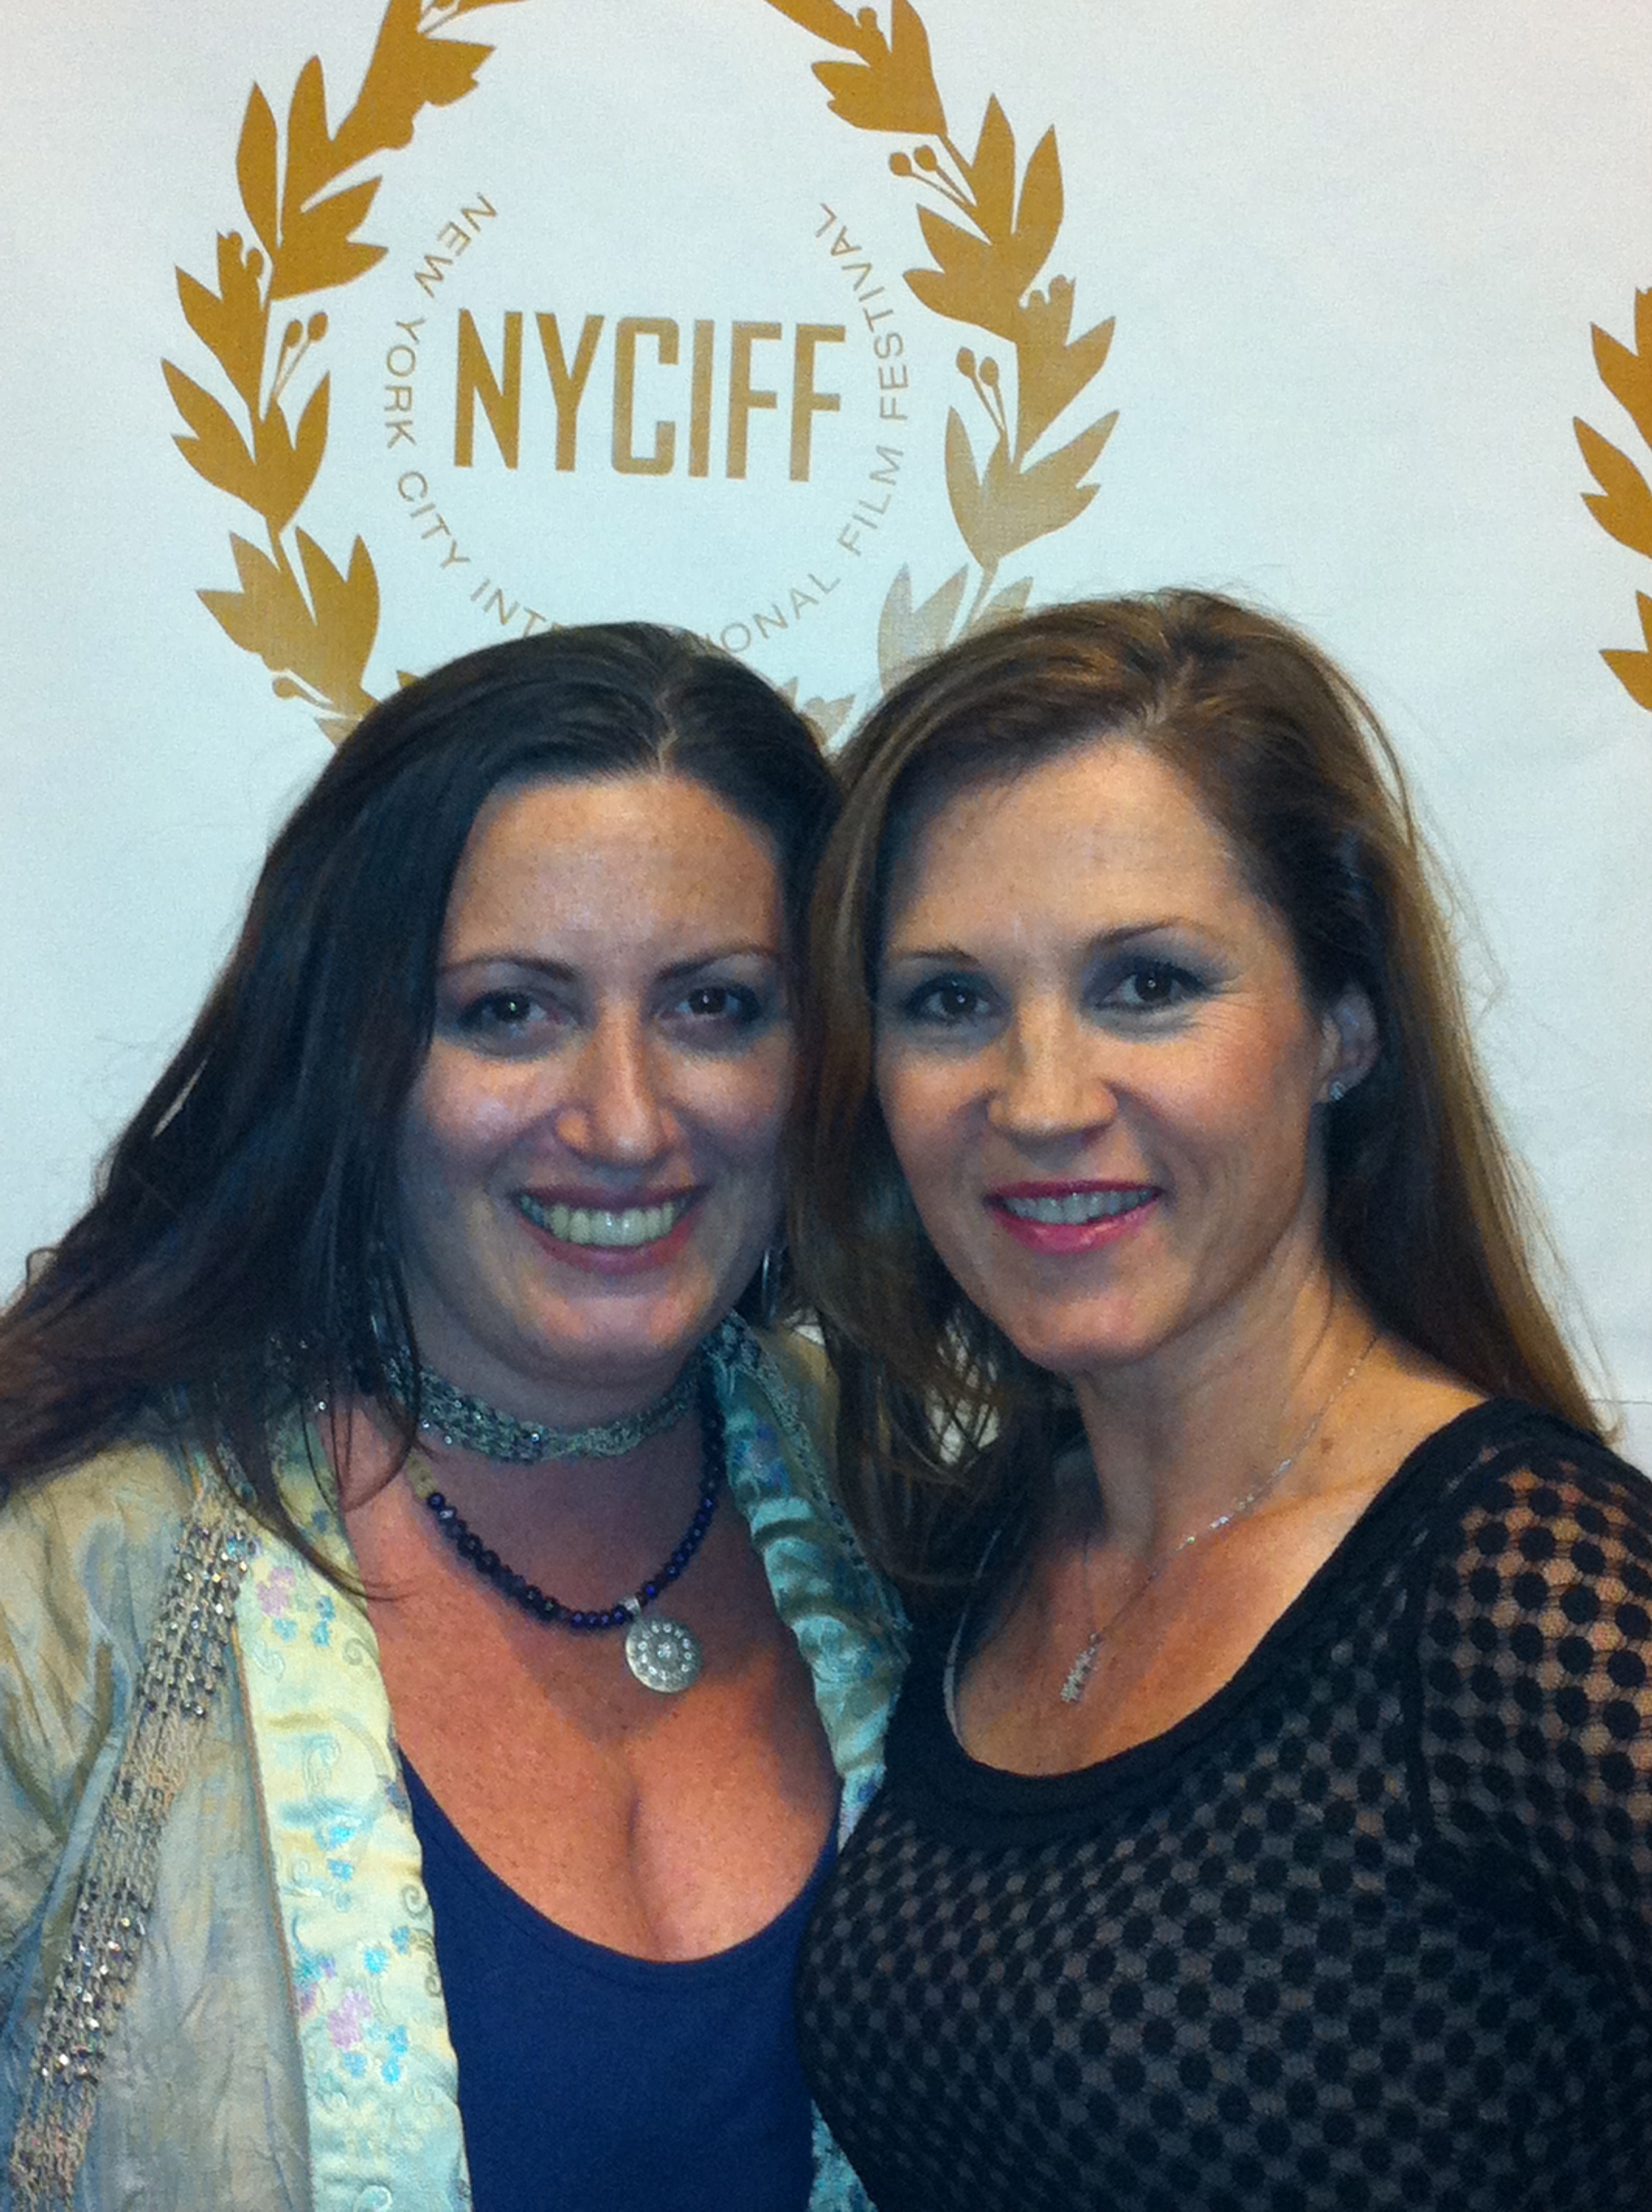 NYCIFF. One Last Shot with Sonia Curtis